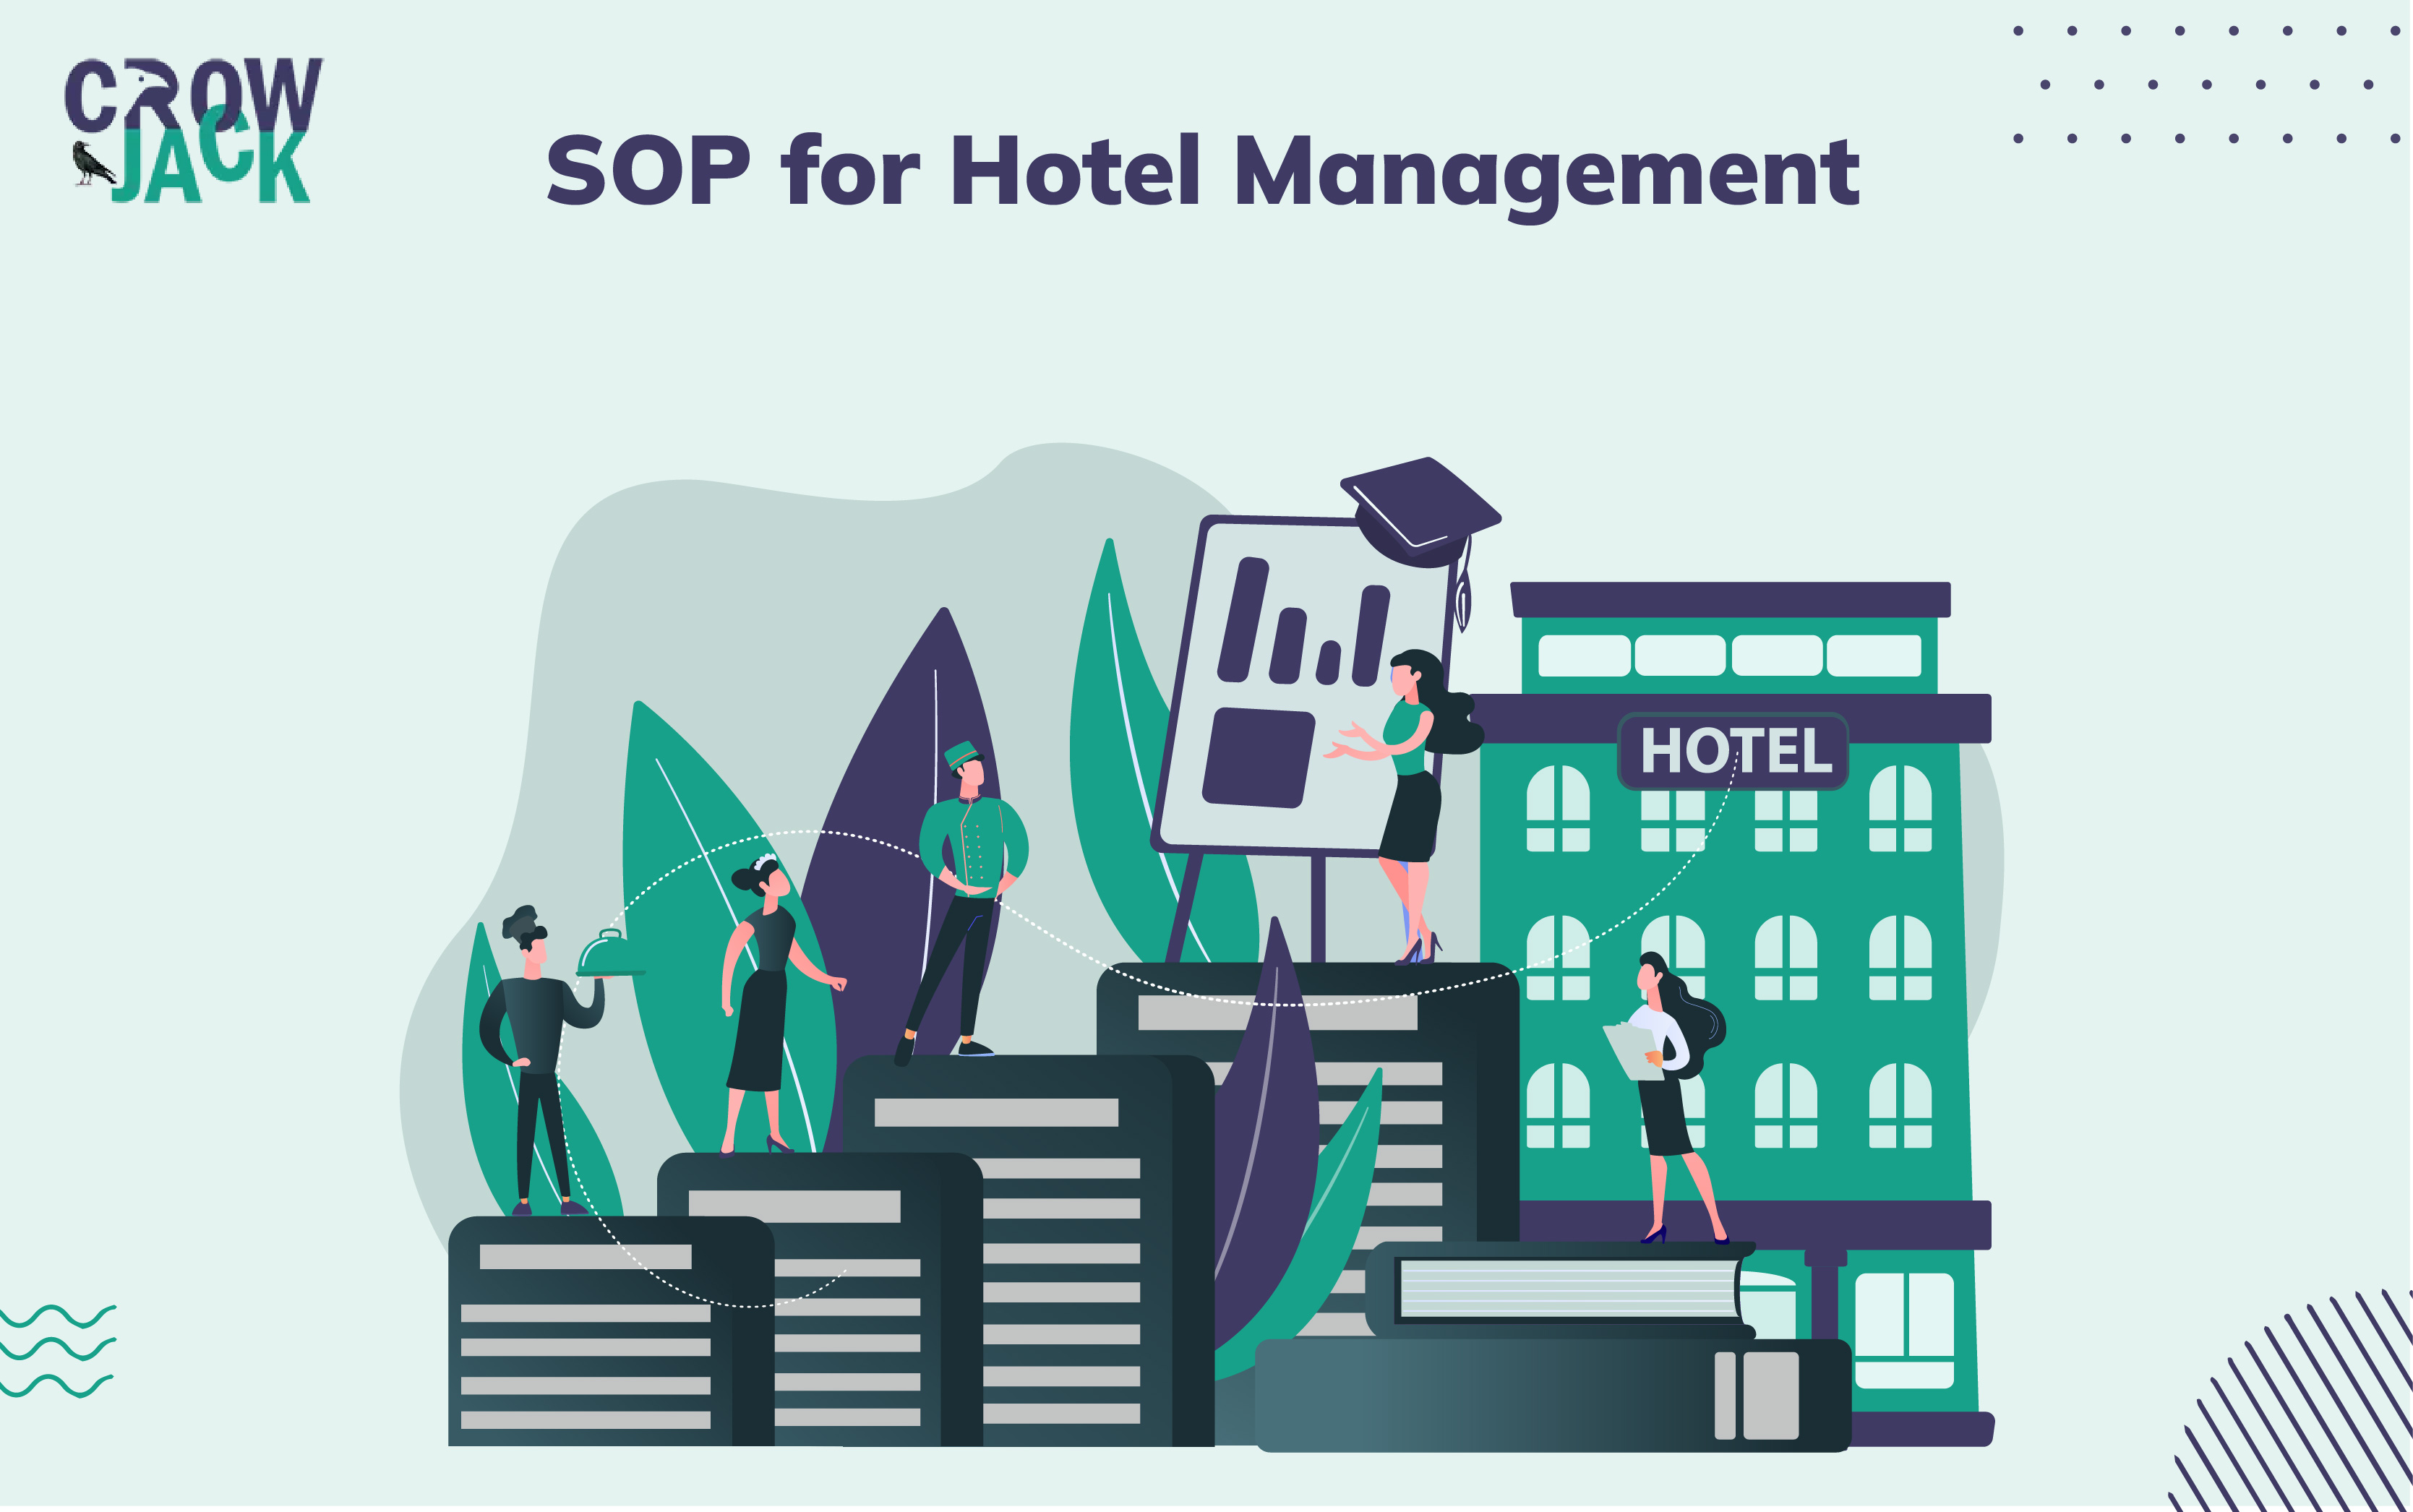 How to Write SOP for Hotel Management with Sample SOP -Image